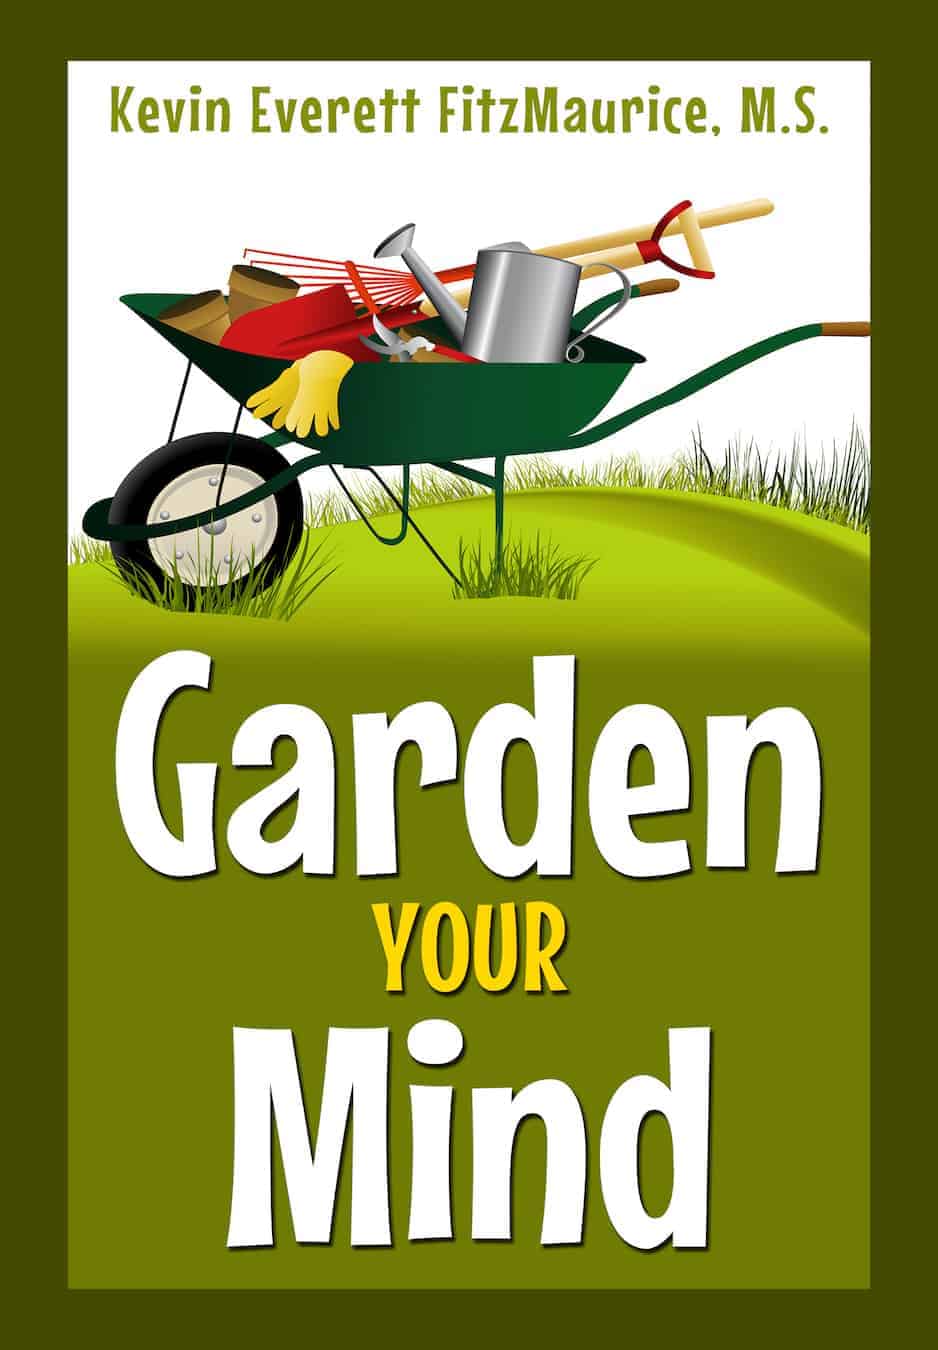 Book cover for "Garden Your Mind"